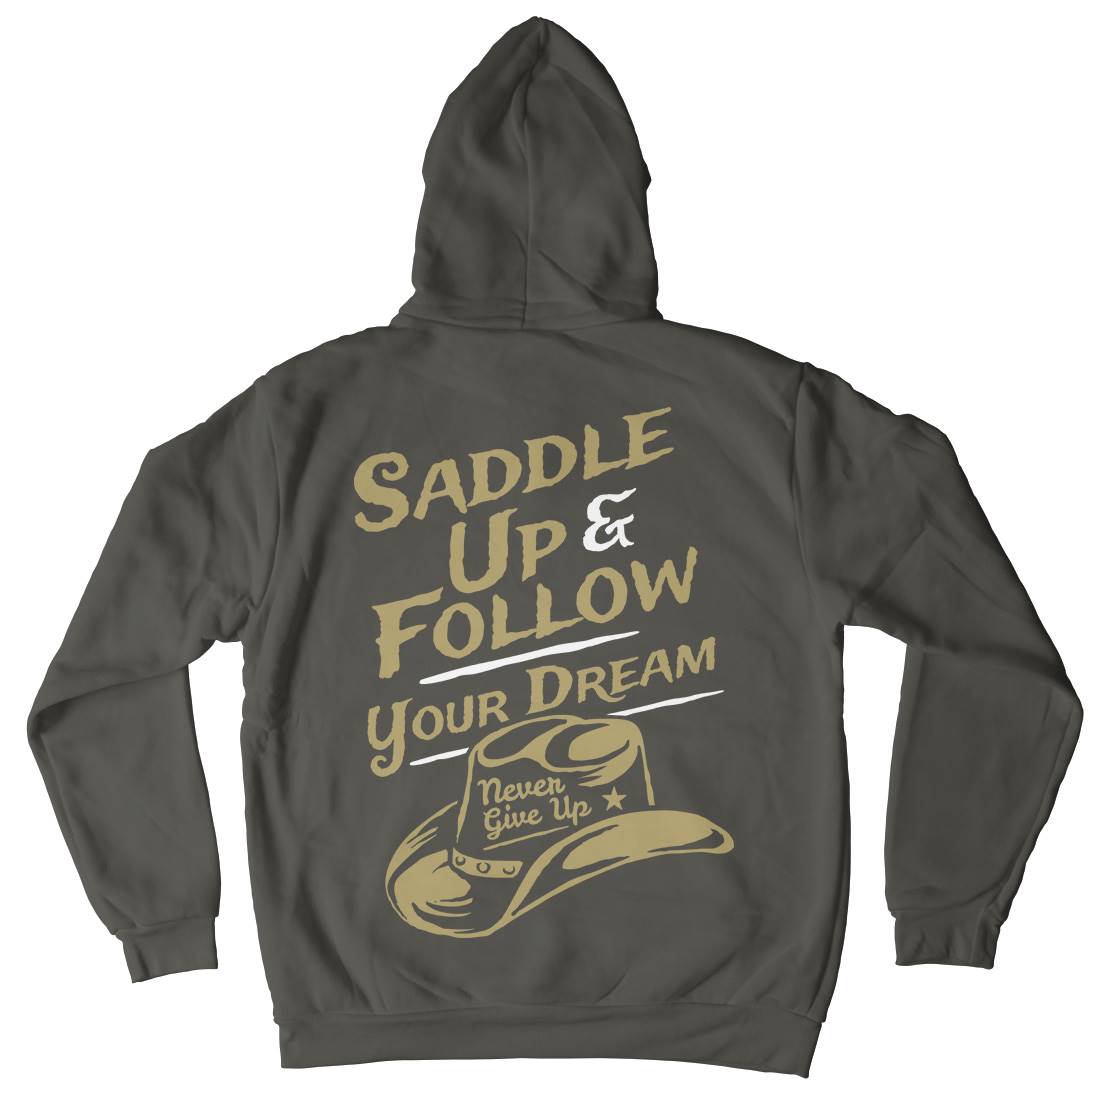 Follow Your Dream Kids Crew Neck Hoodie American A315